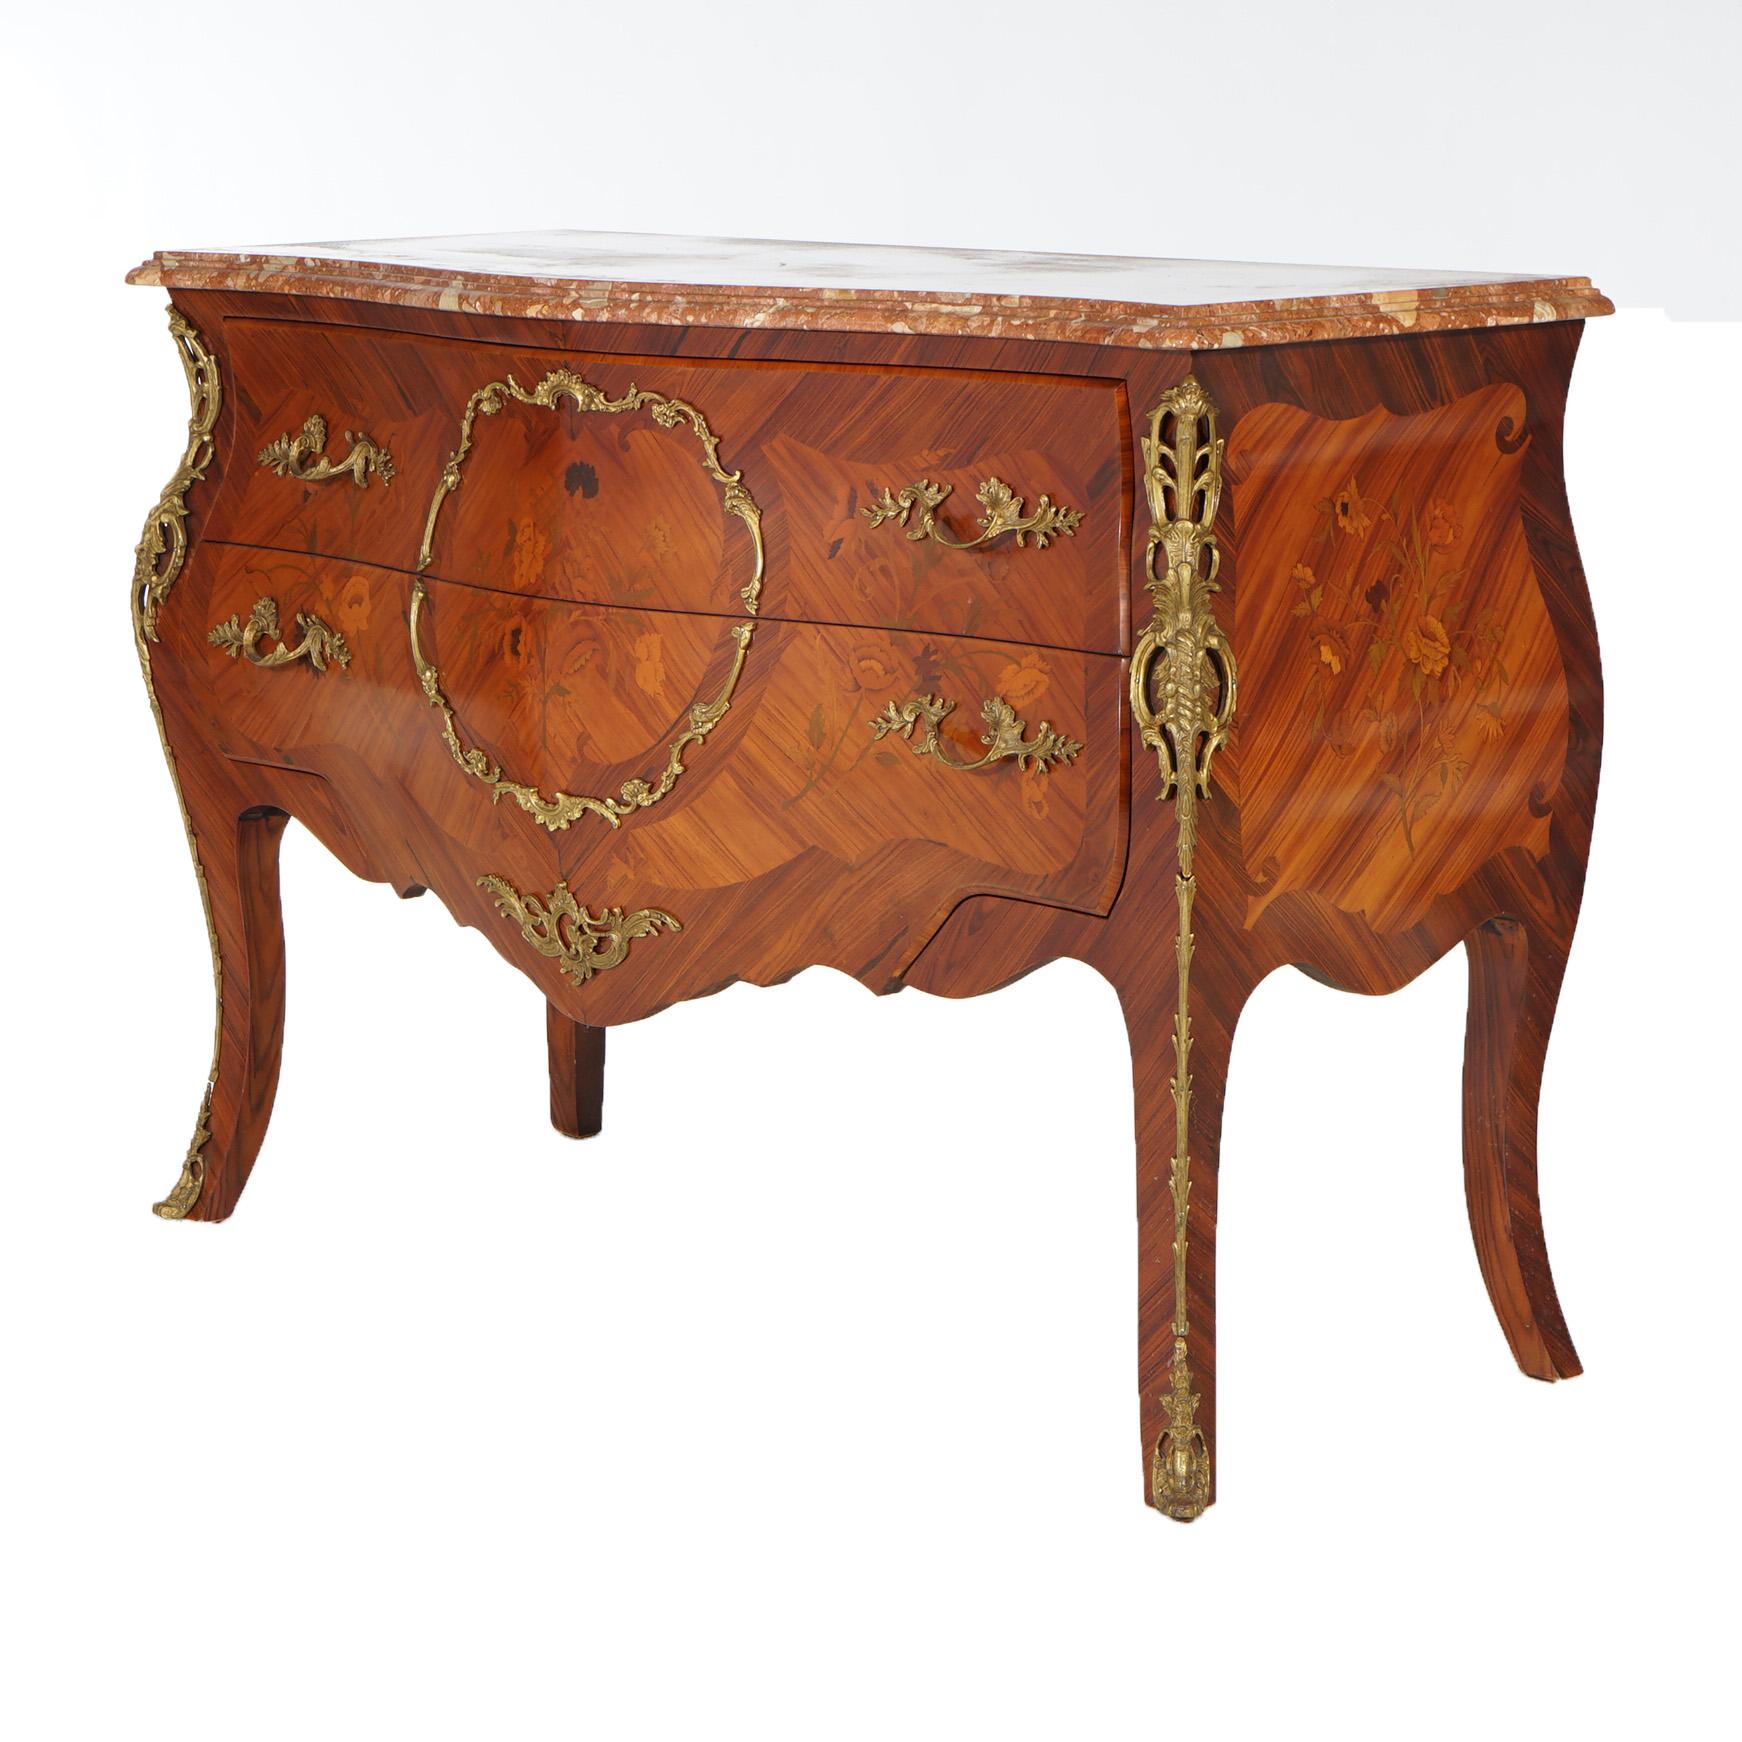 An antique French Louis XV style commode offers rouge marble top over kingwood case with satinwood marquetry and cast ormolu mounts, raised on cabriole legs, 20th century

Measures -35.5